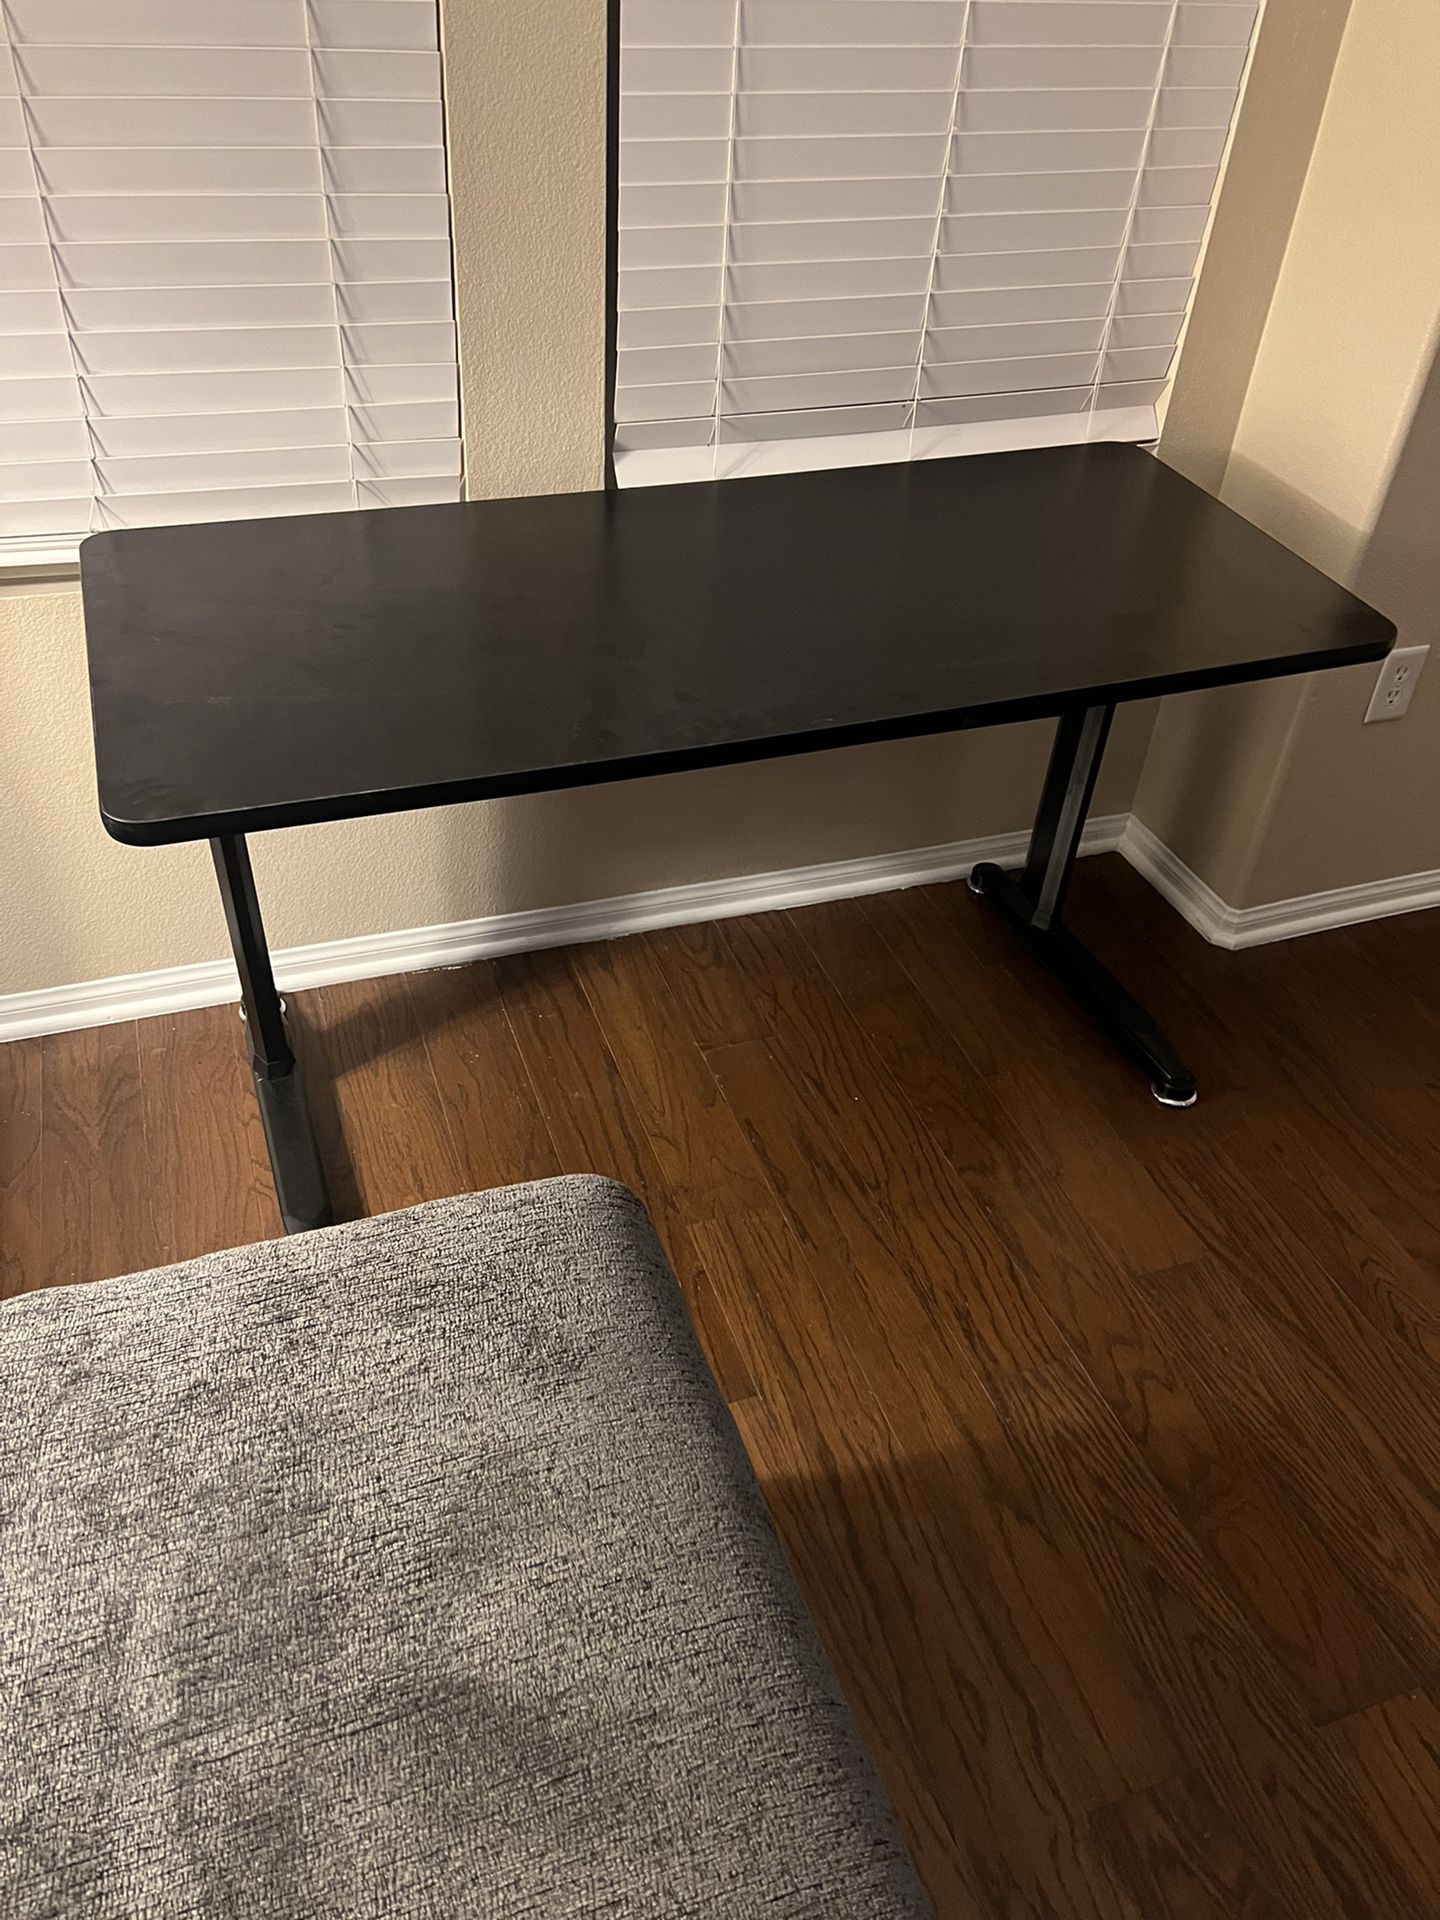 Wood Desk Adjustable Height 55 X 23.5 Inches 